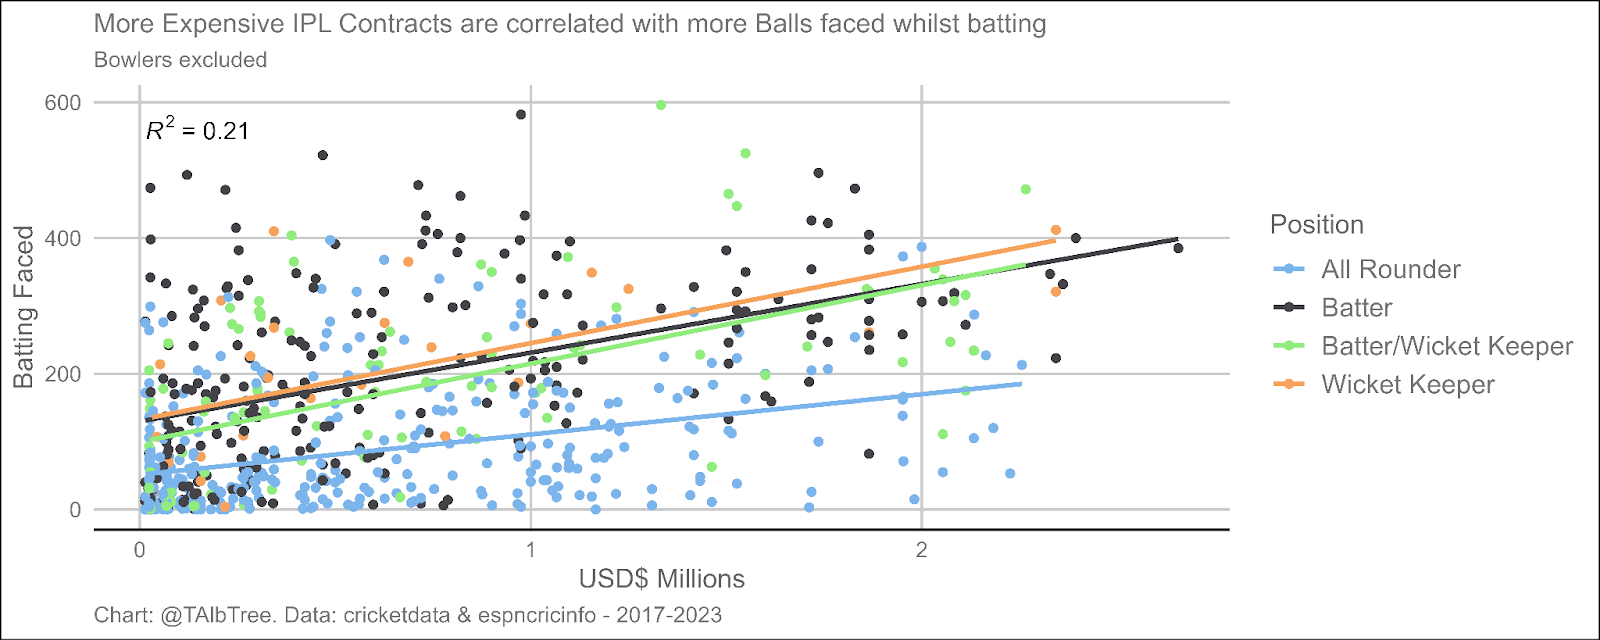 Scatter and line plot of IPL salary amount compared to balls faced whilst batting - split by position. R squared - 0.21